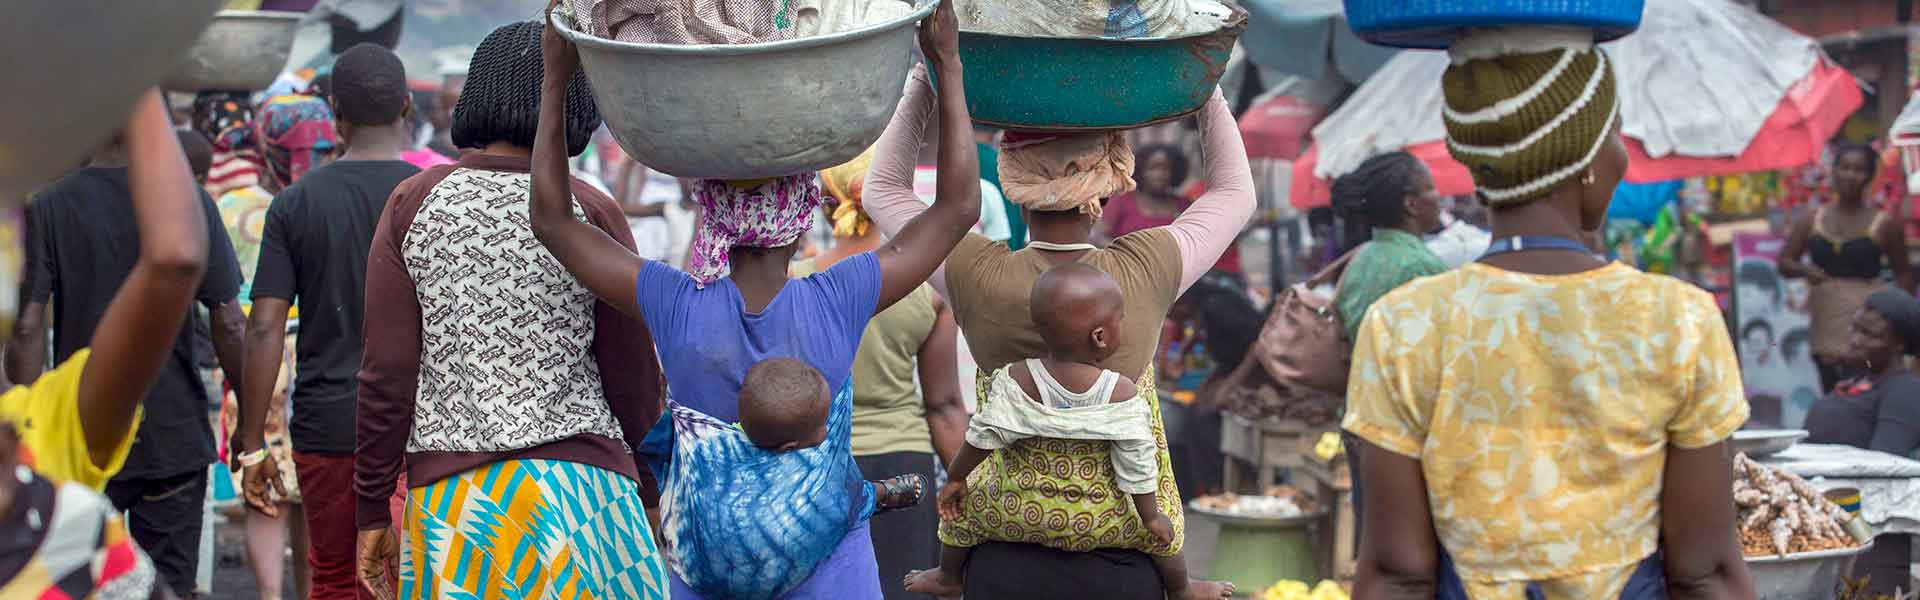 Kayayei carry goods on their heads in Kantamanto Market in Accra, Ghana